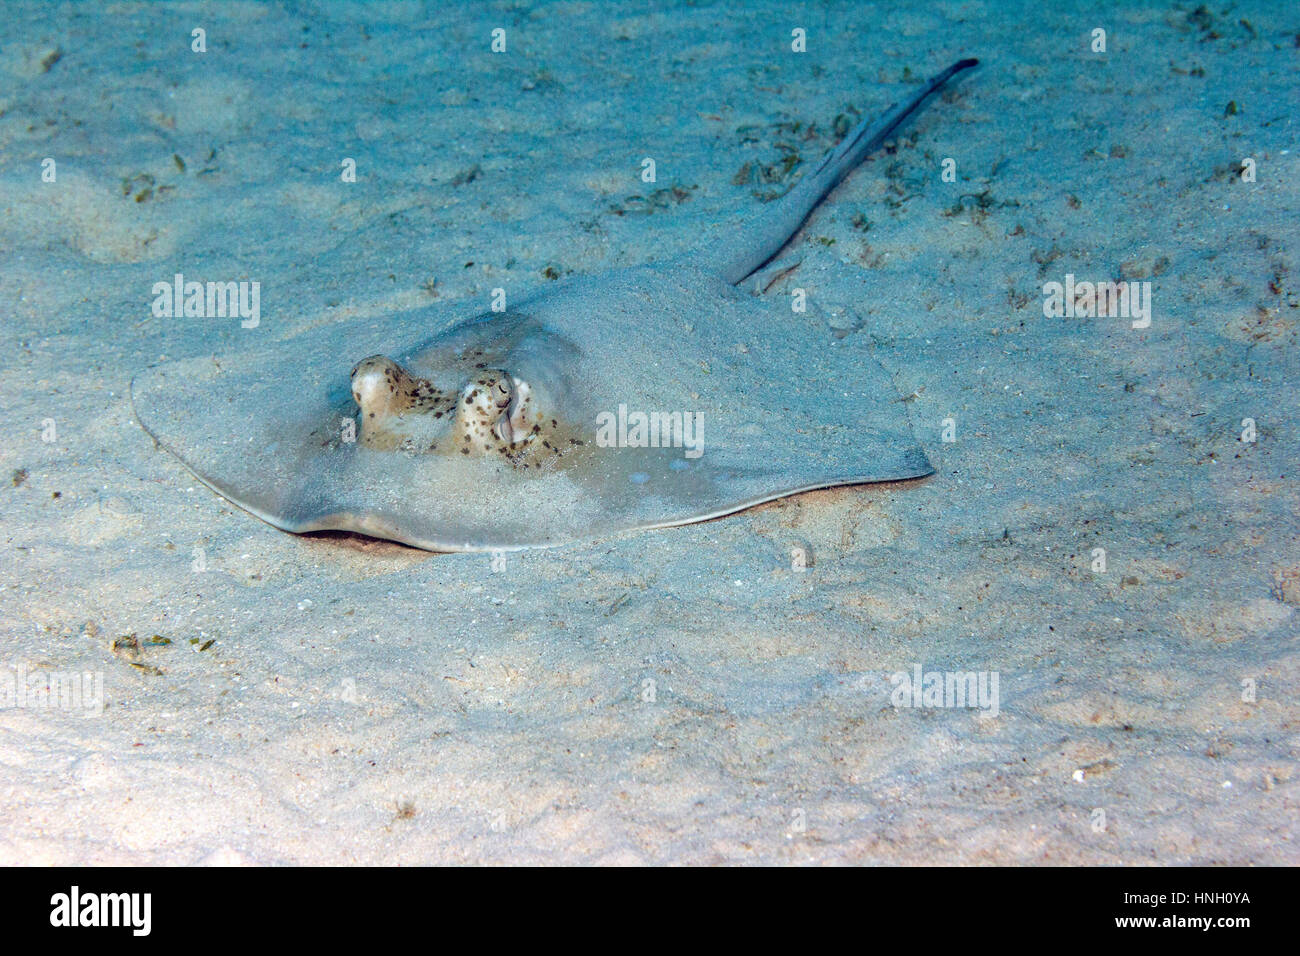 Blue spotted stingray (Neotrygon kuhlii), Great Barrier Reef, Queensland, Australia Stock Photo